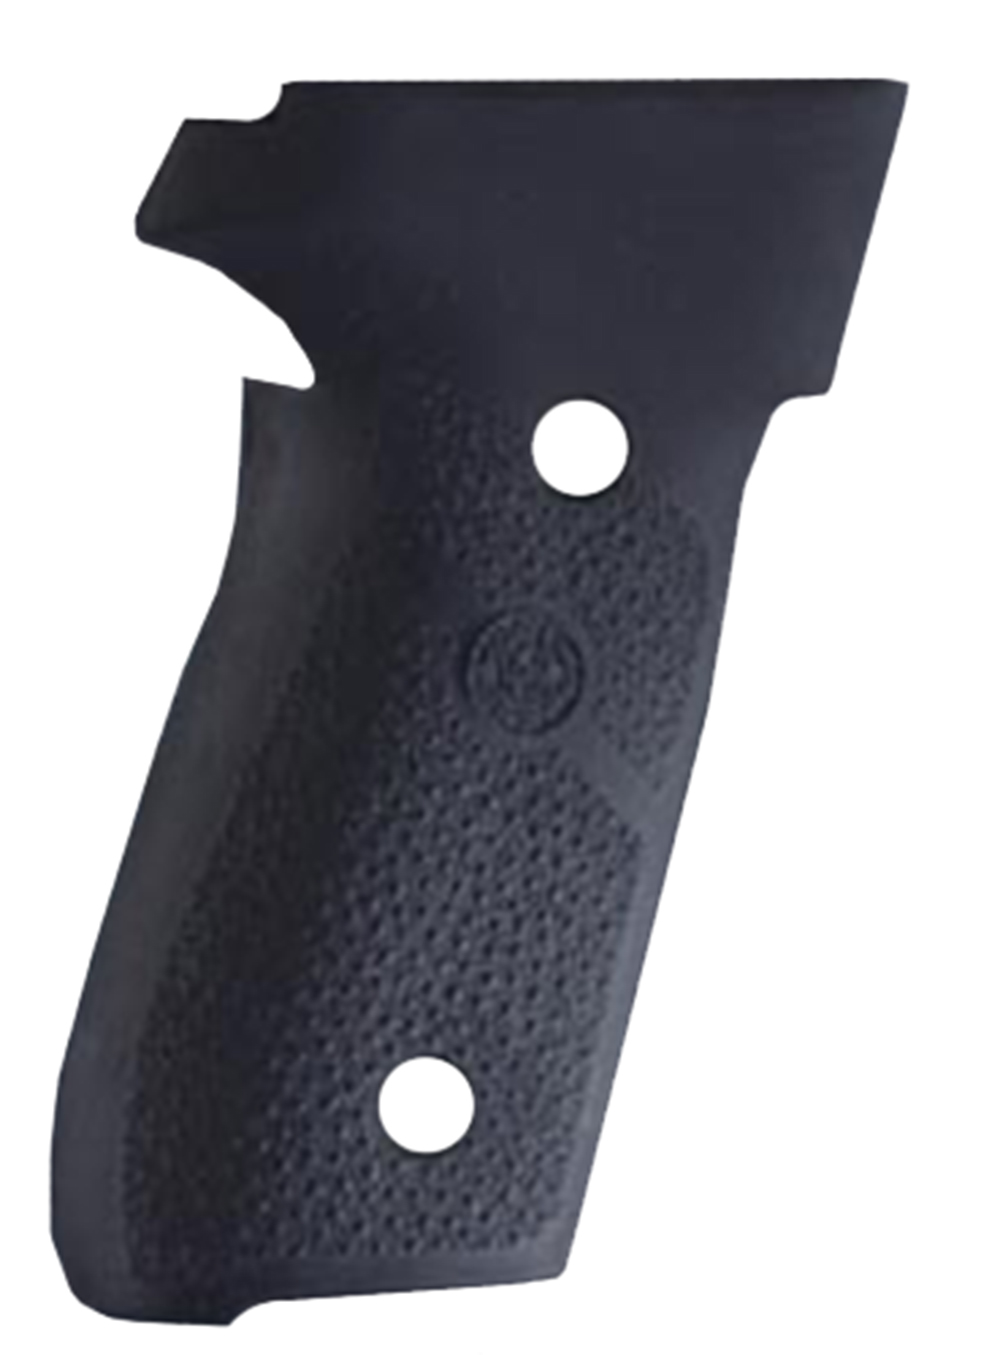 HOGUE GRIPS SIGARMS P228 & P229 RUBBER PANELS BLACK